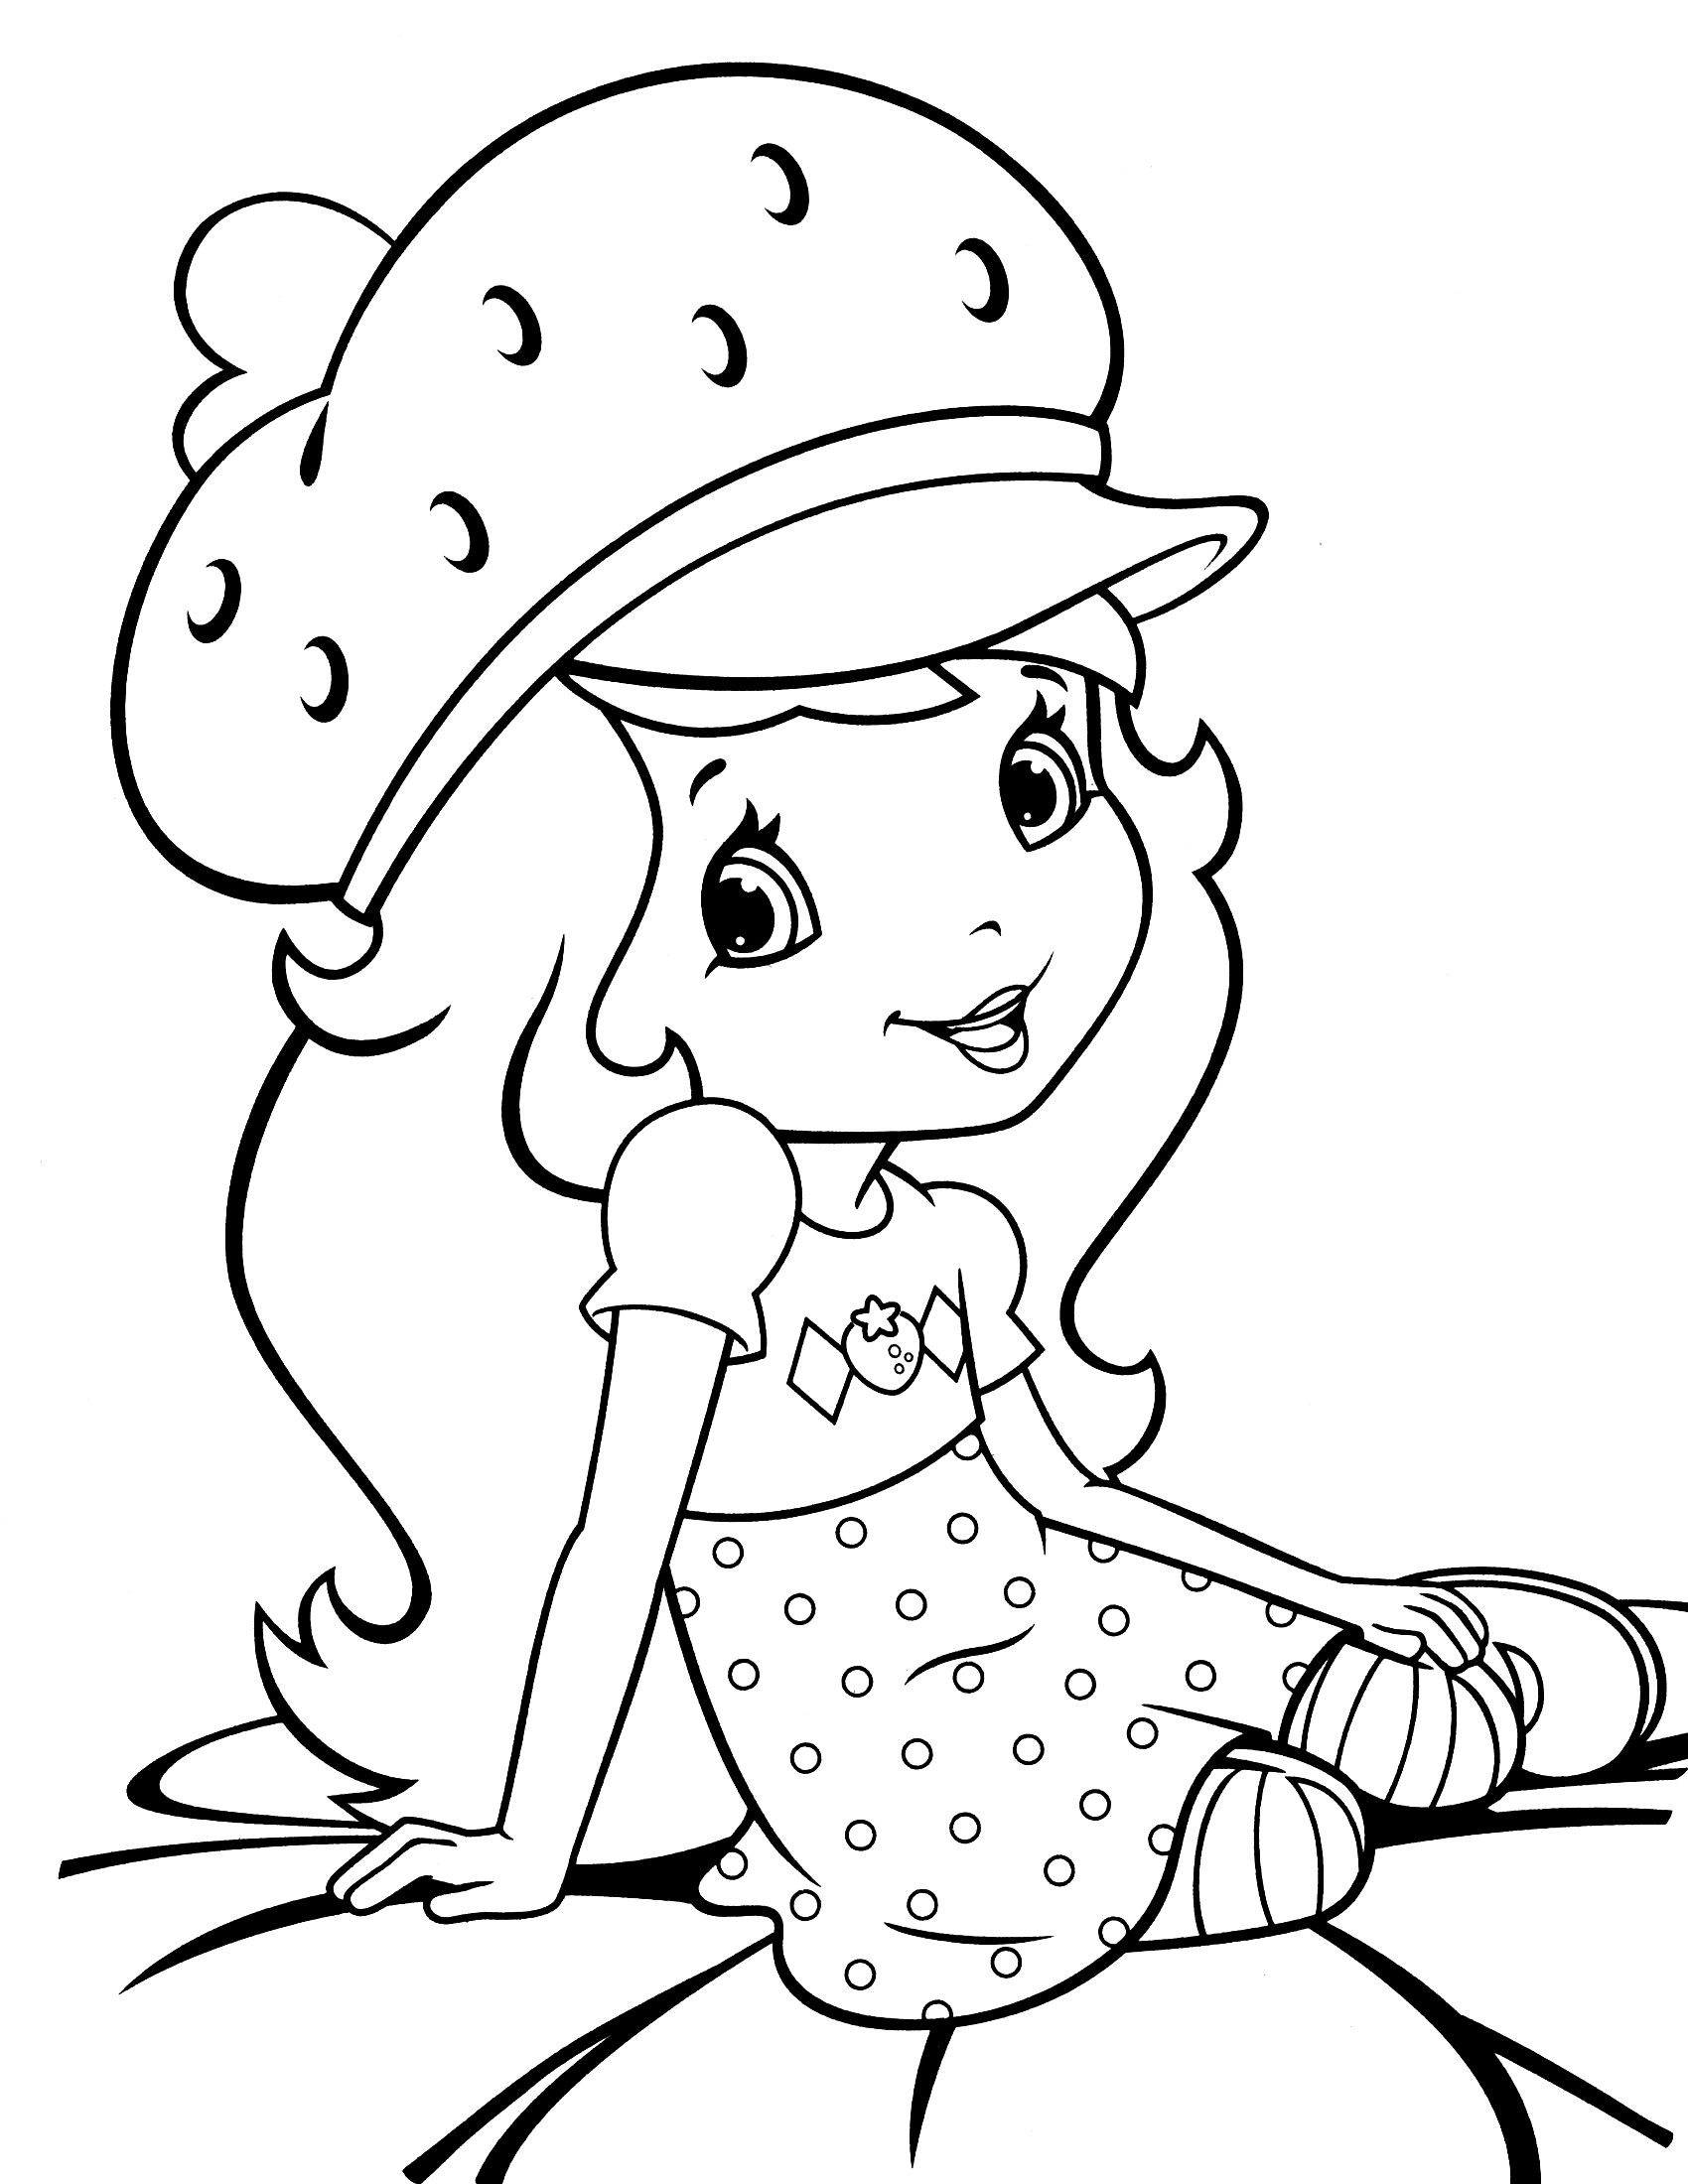  Strawberry Shortcake Coloring Pages / Cool coloring pages / 13